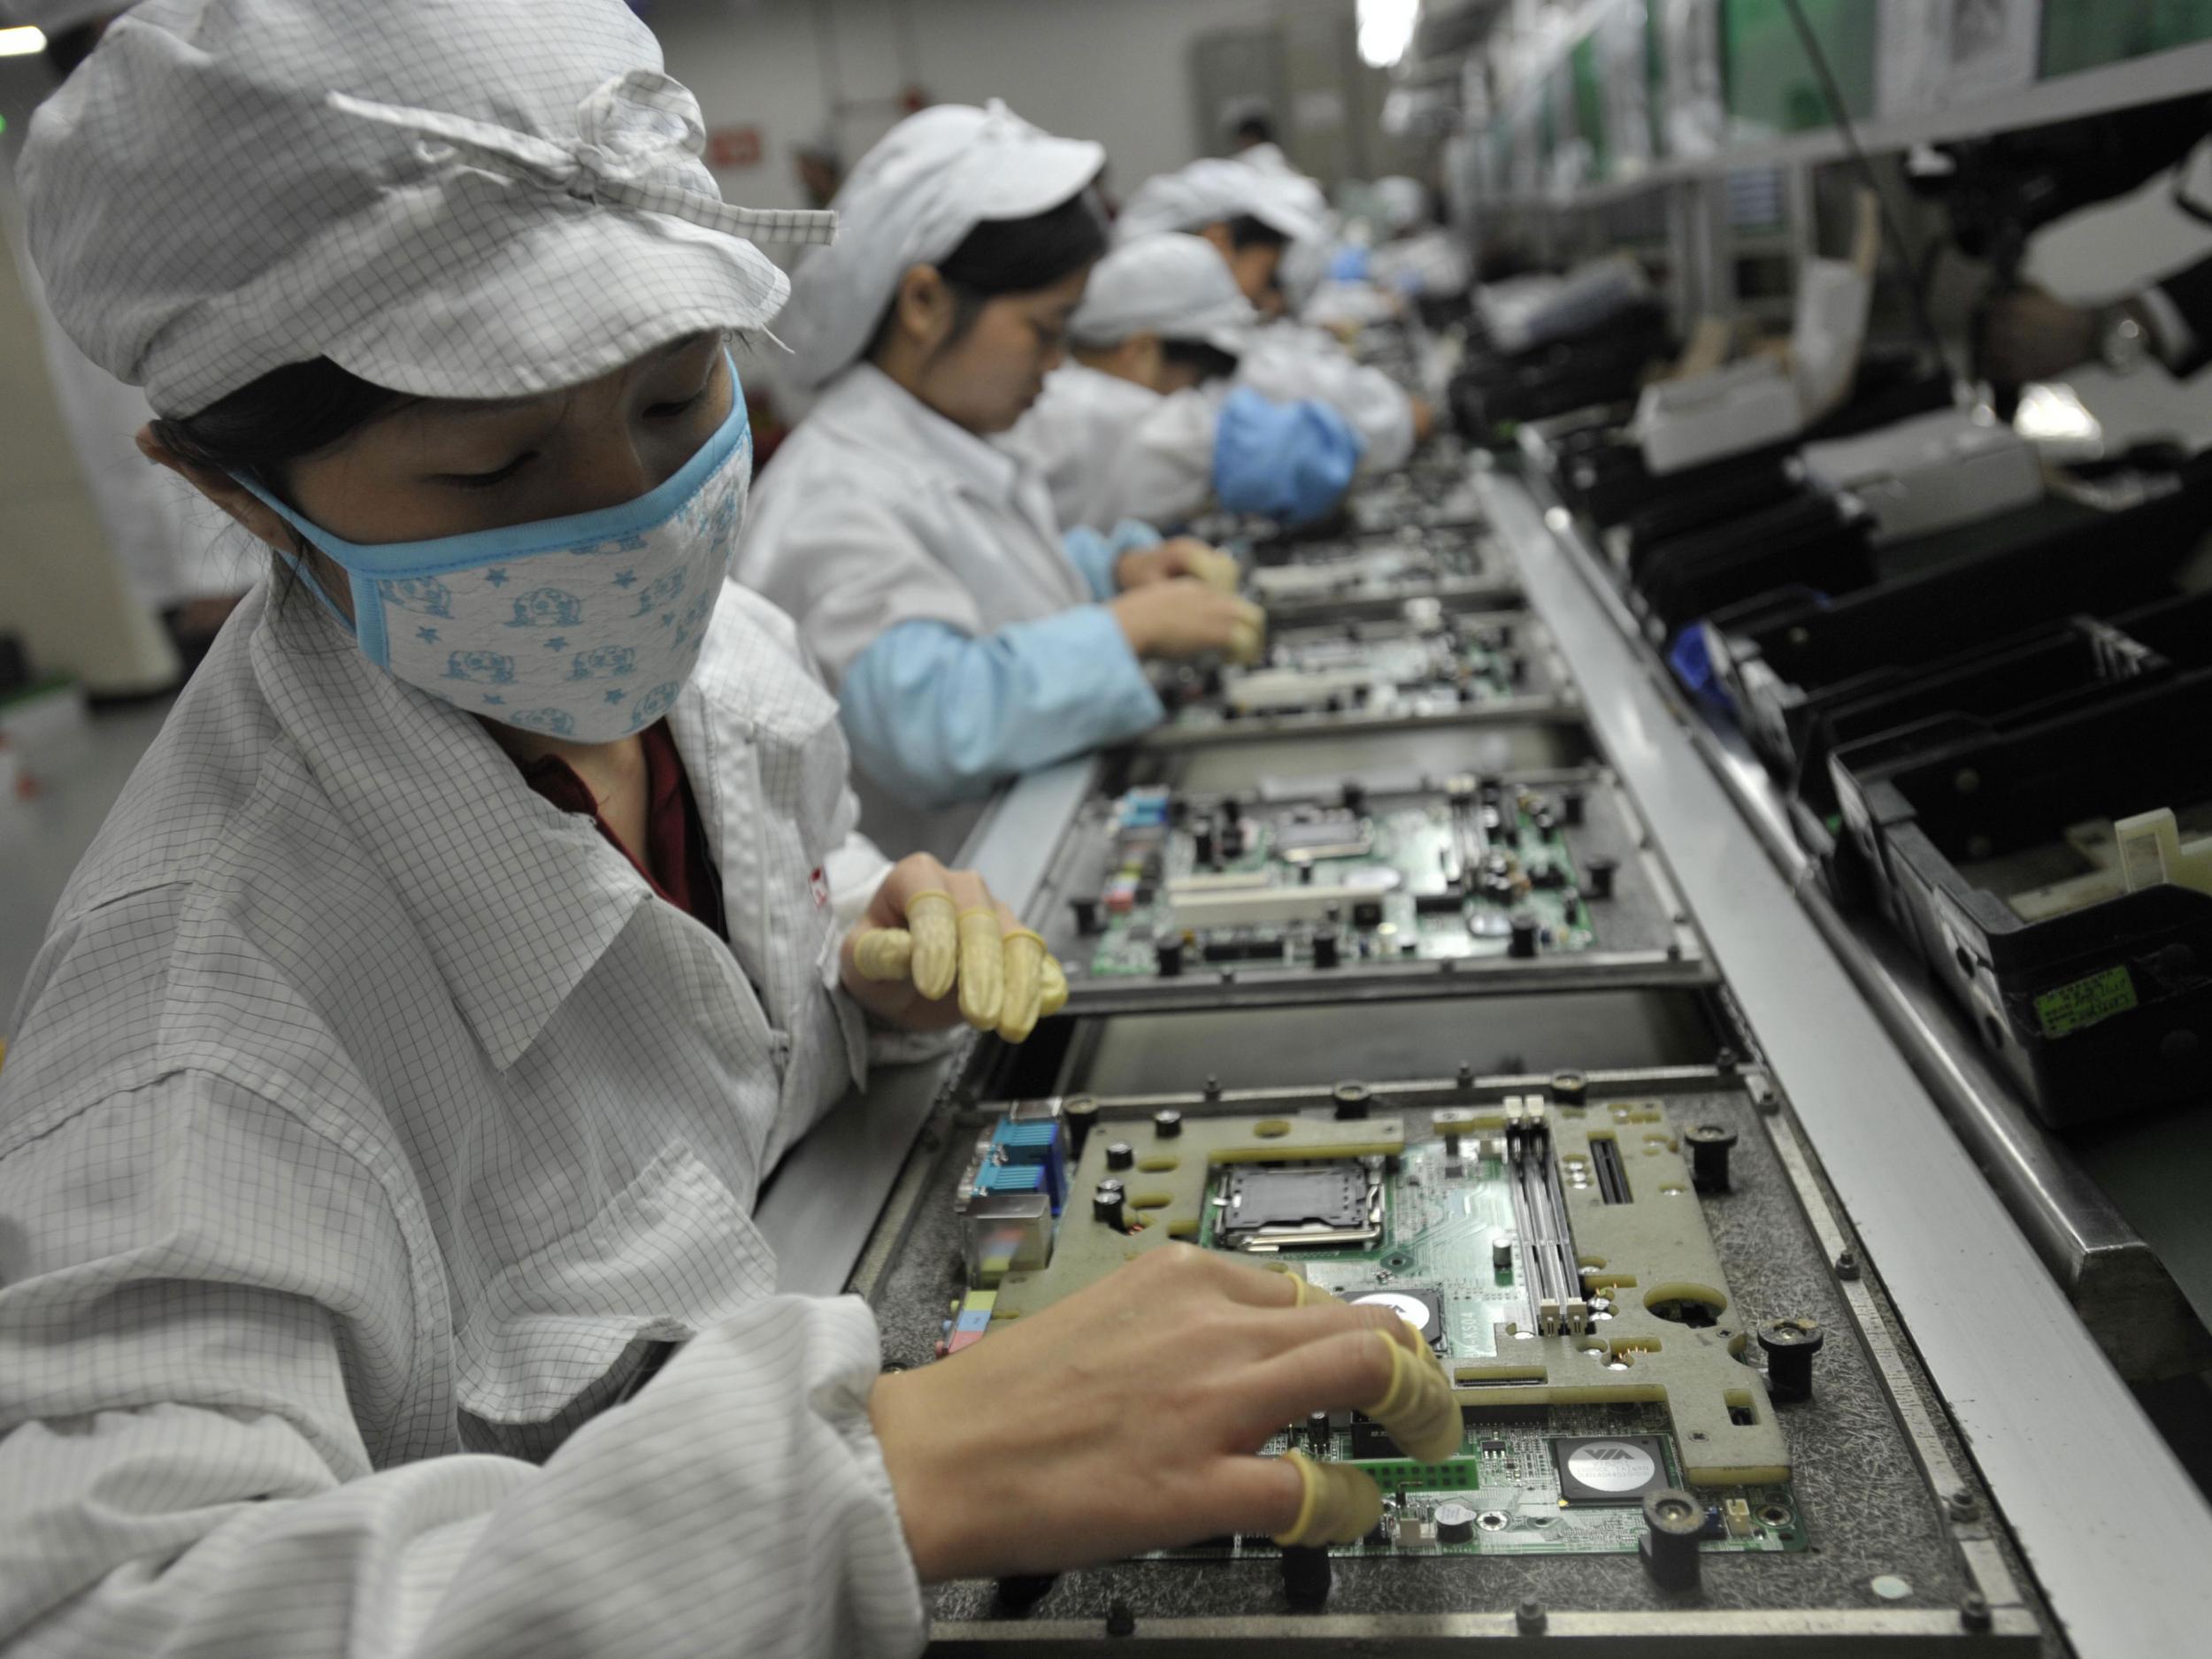 Chinese workers in the Foxconn factory in Shenzhen, in southern China's Guangdong province.